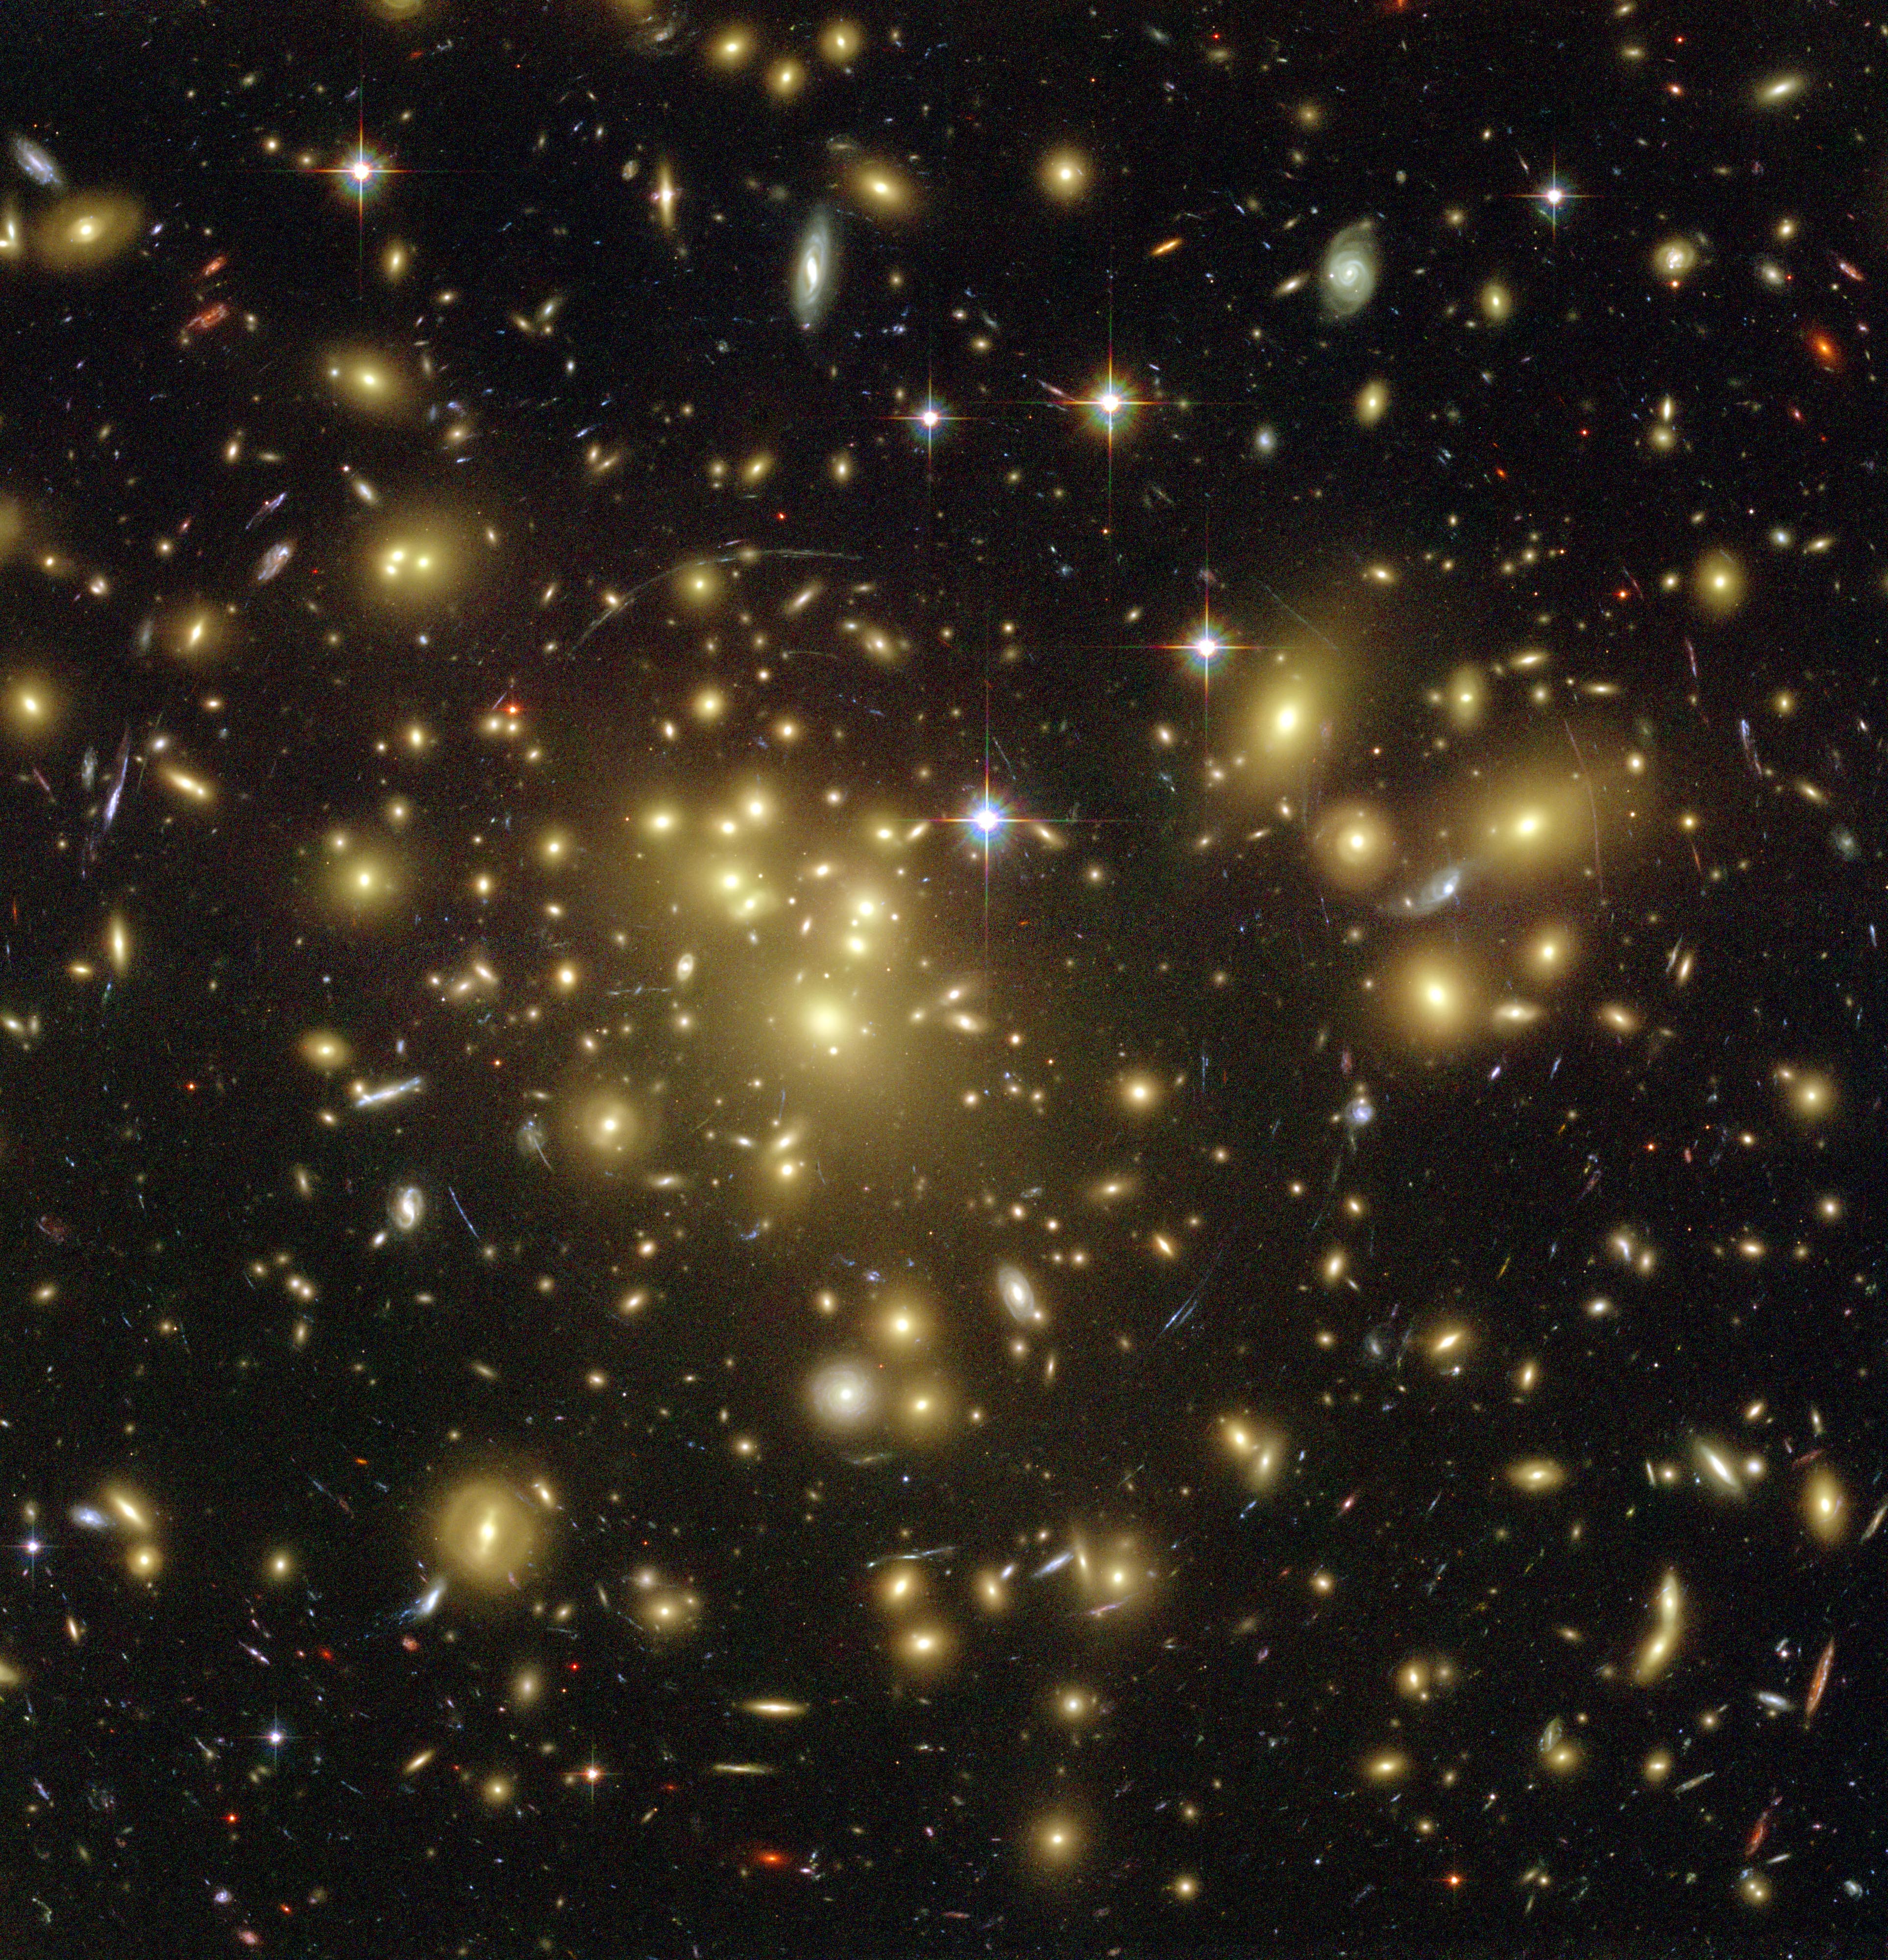 Bright yellow-white galaxies fill the field of view. A few foreground stars dot the scene in the upper half of the image. Faint arcs of gravitationally lensed background galaxies.